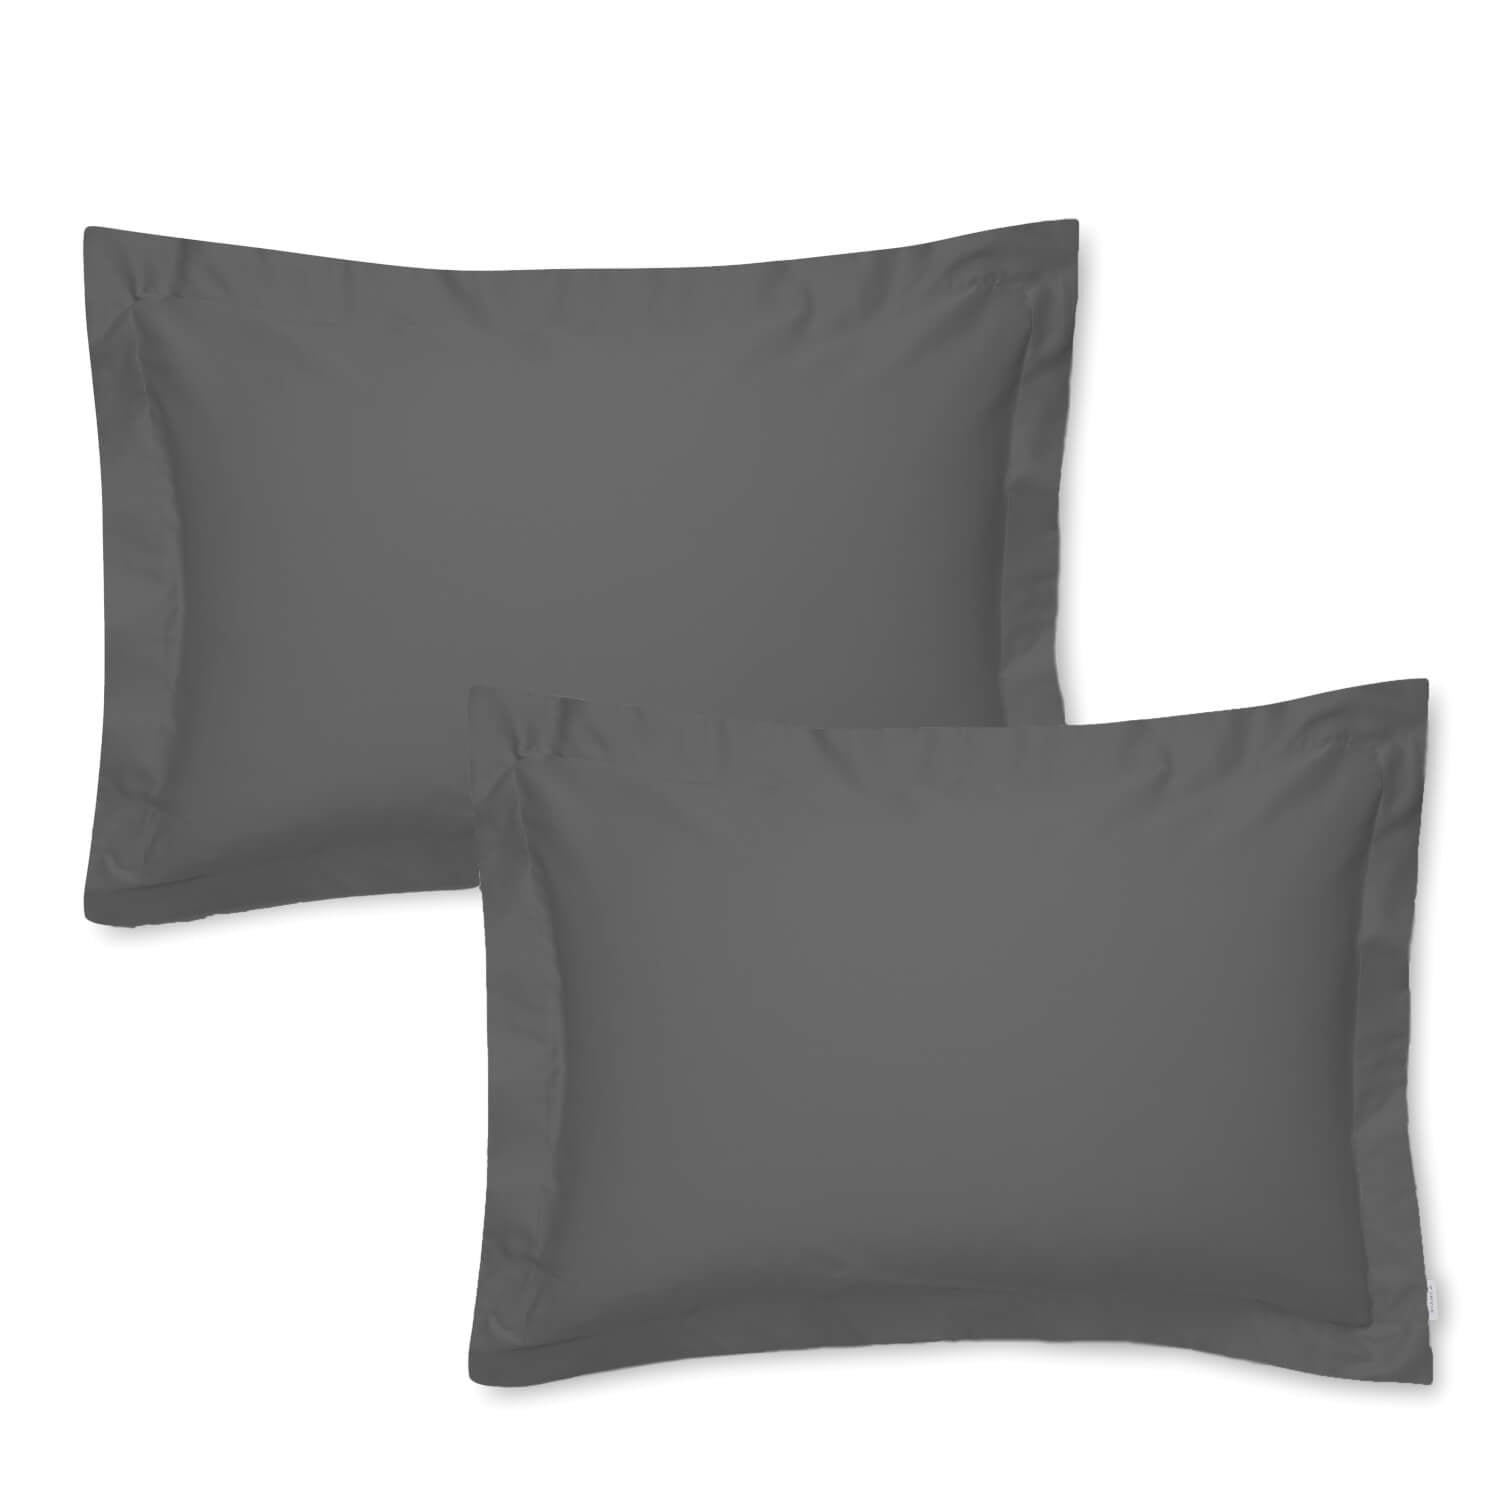 Bianca 400 Thread Count Cotton Sateen Oxford Pillowcase Pair - Charcoal 1 Shaws Department Stores